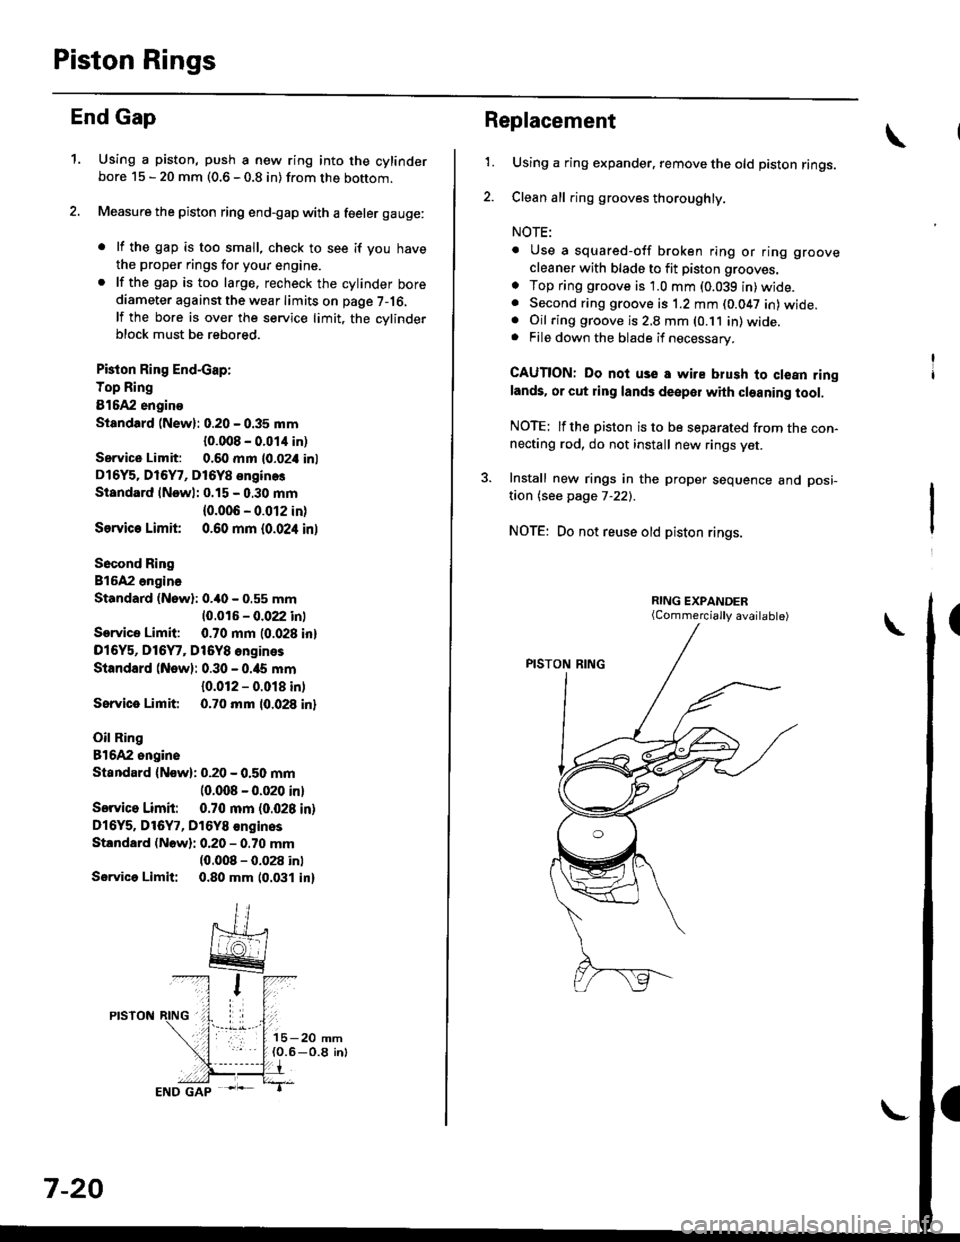 HONDA CIVIC 1997 6.G Owners Guide Piston Rings
End Gap
1.Using a piston, push a new ring into the cylinderbore 15 - 20 mm (0.6 - 0.8 in) from the bottom.
Measure the piston ring end-gap with a feeler gauge:
. lf the gap is too small, 